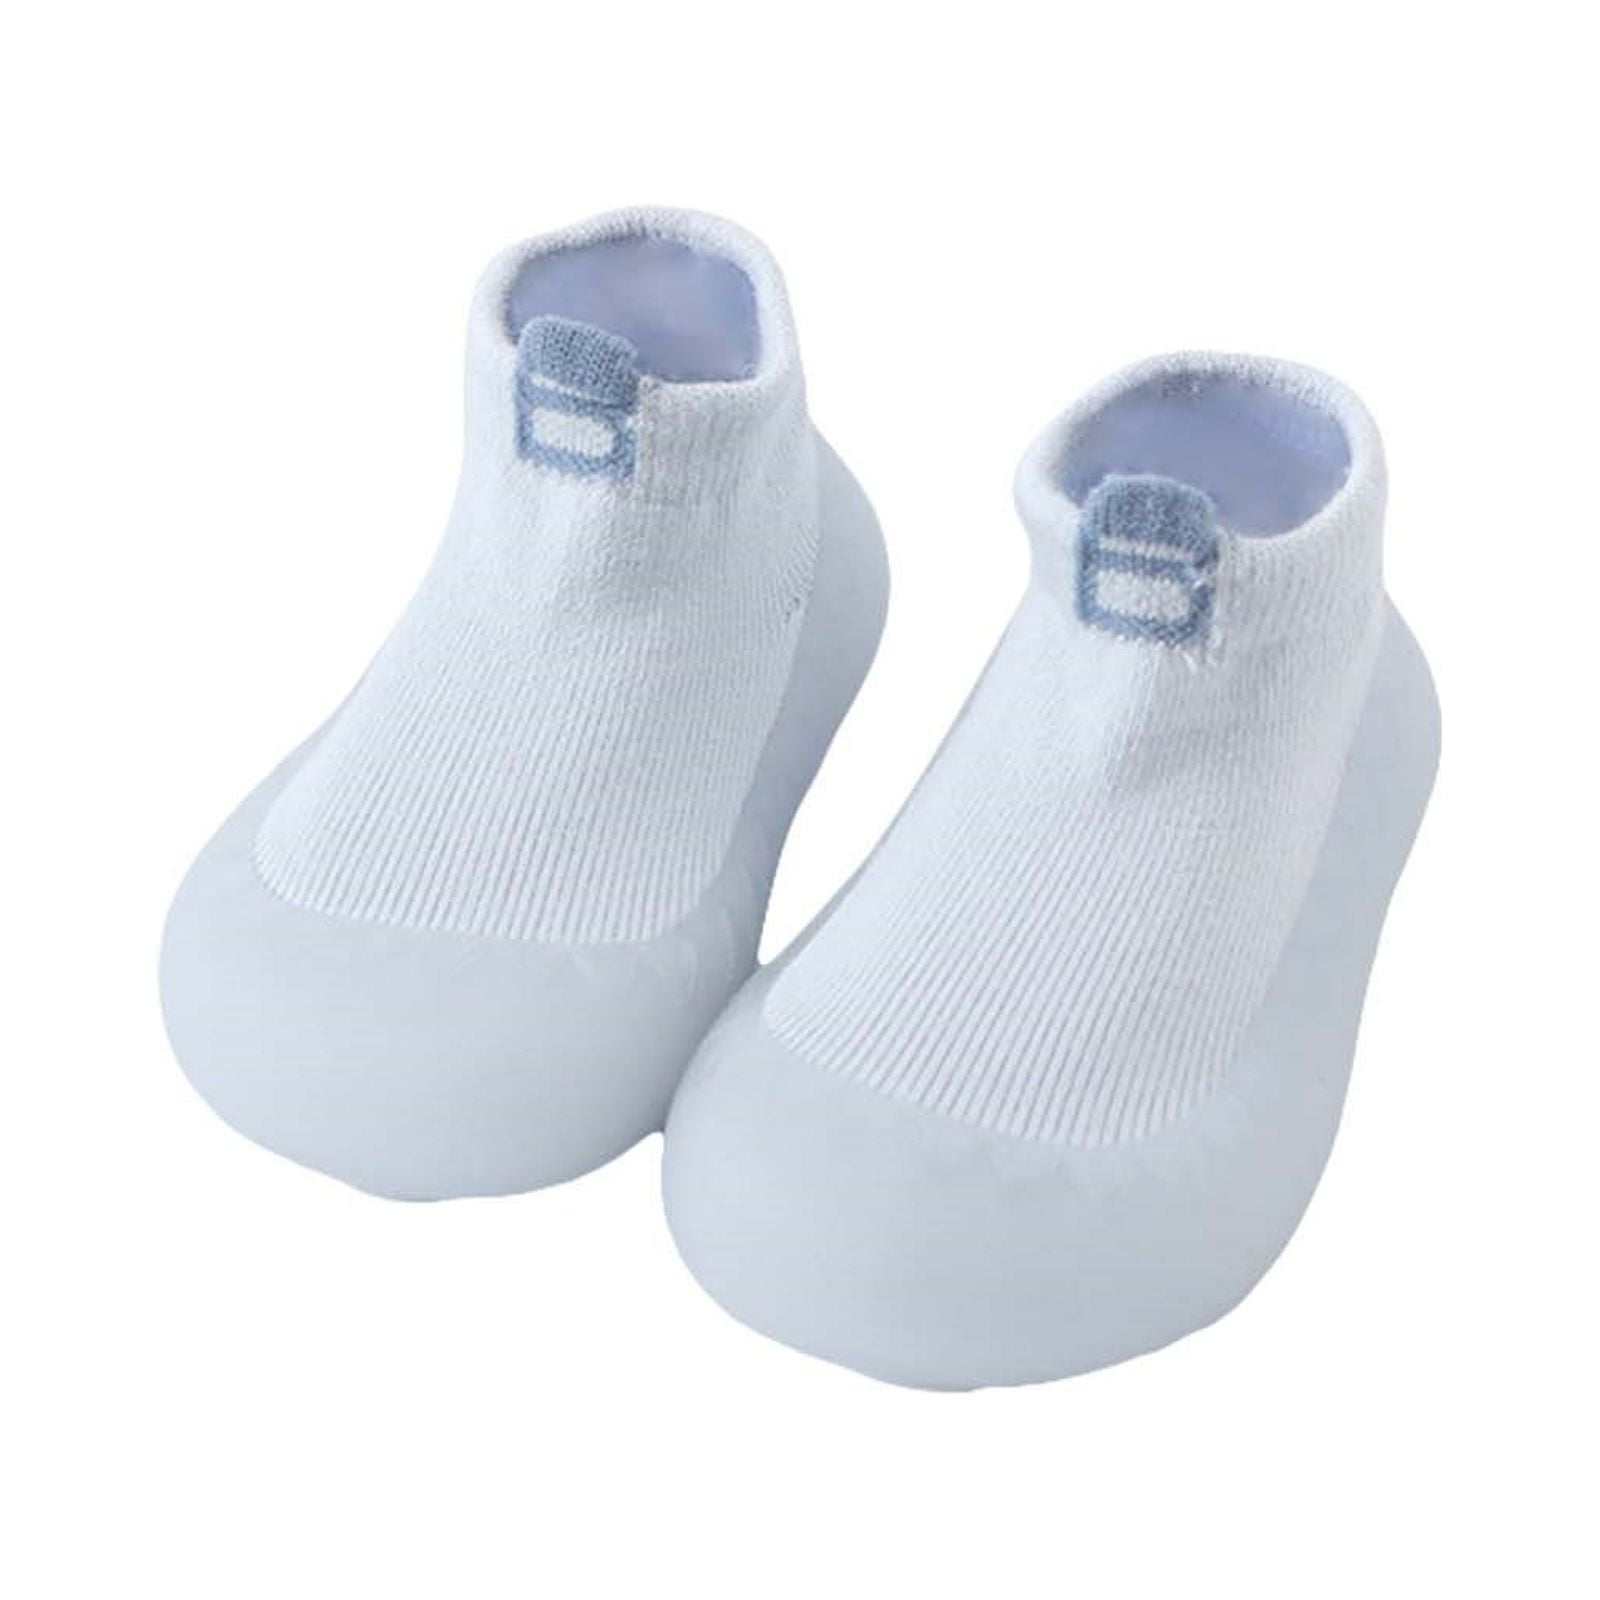 Girls' Boys' Simple Solid Color Soft Covered Socks Shoes Five Colors ...